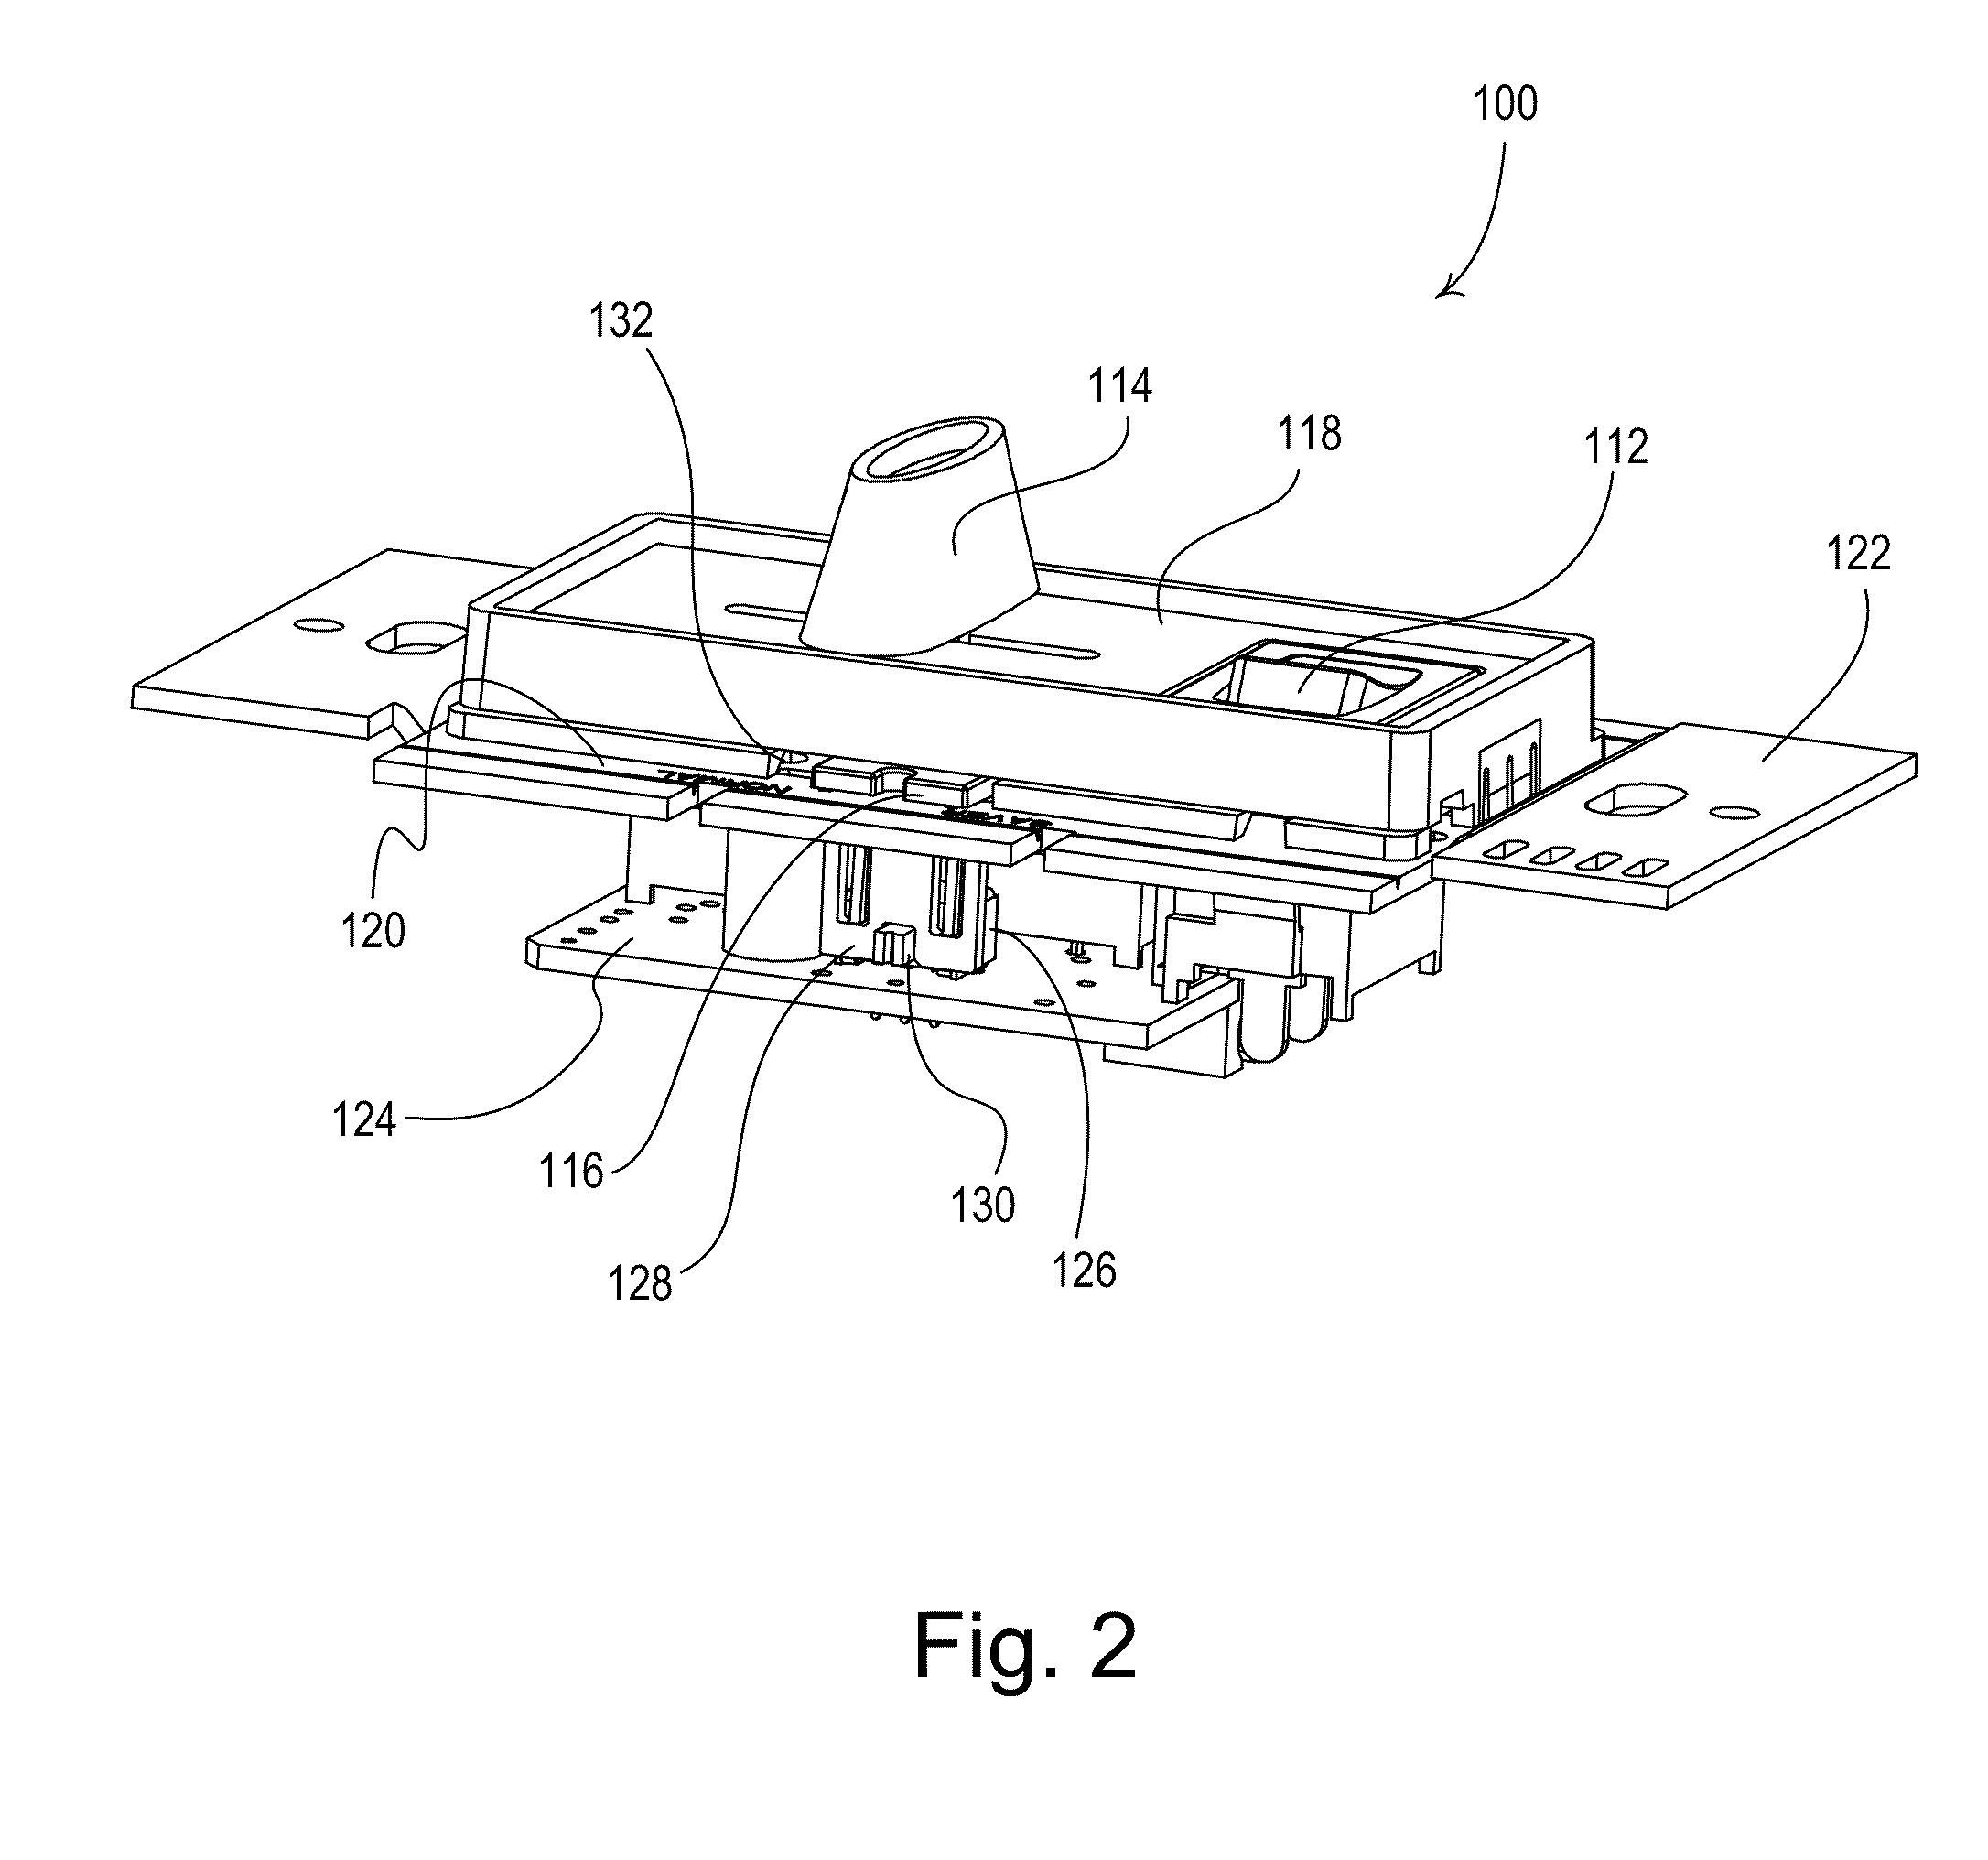 Load Control Device Having a Visual Indication of an Energy Savings Mode